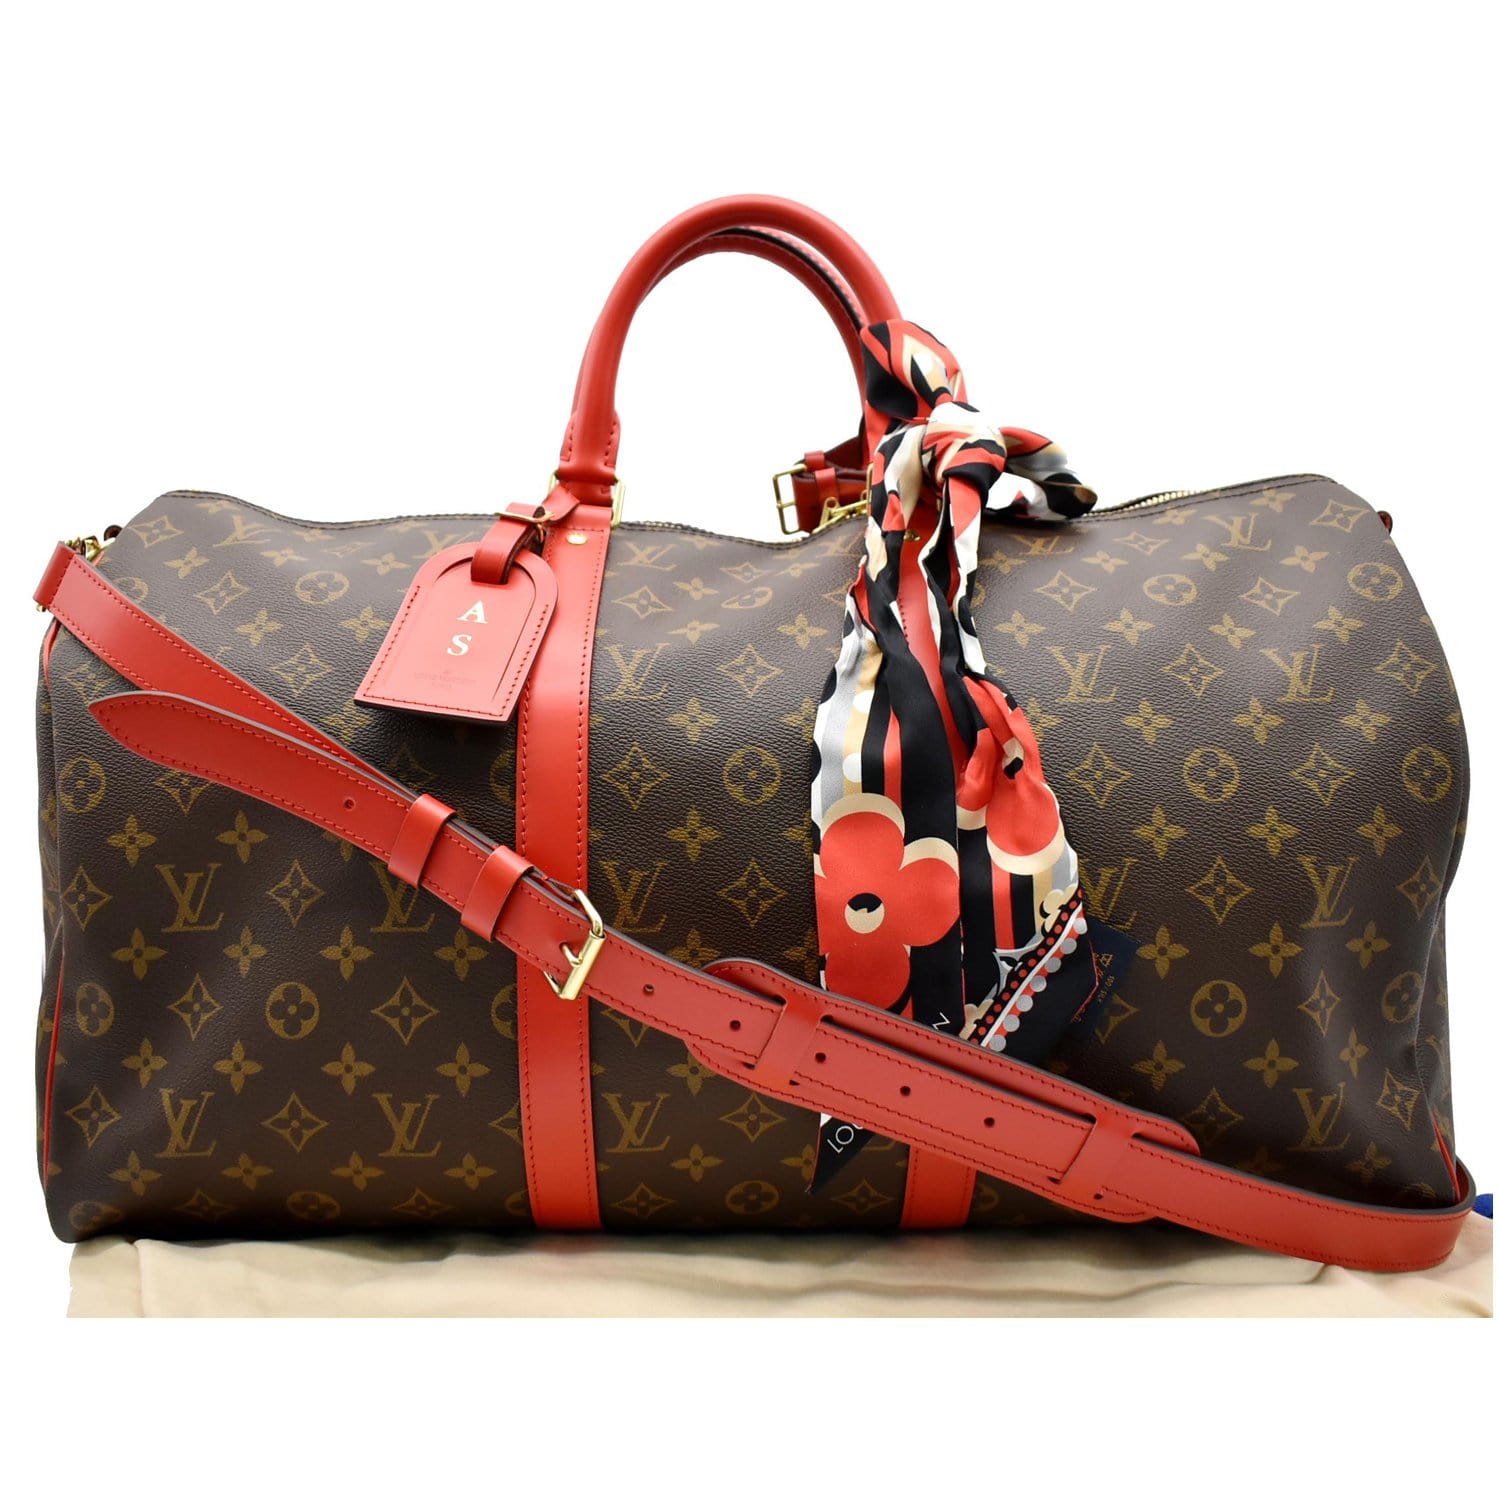 Travel bag with initials  Louis vuitton duffle bag, Louis vuitton travel  bags, Louis vuitton